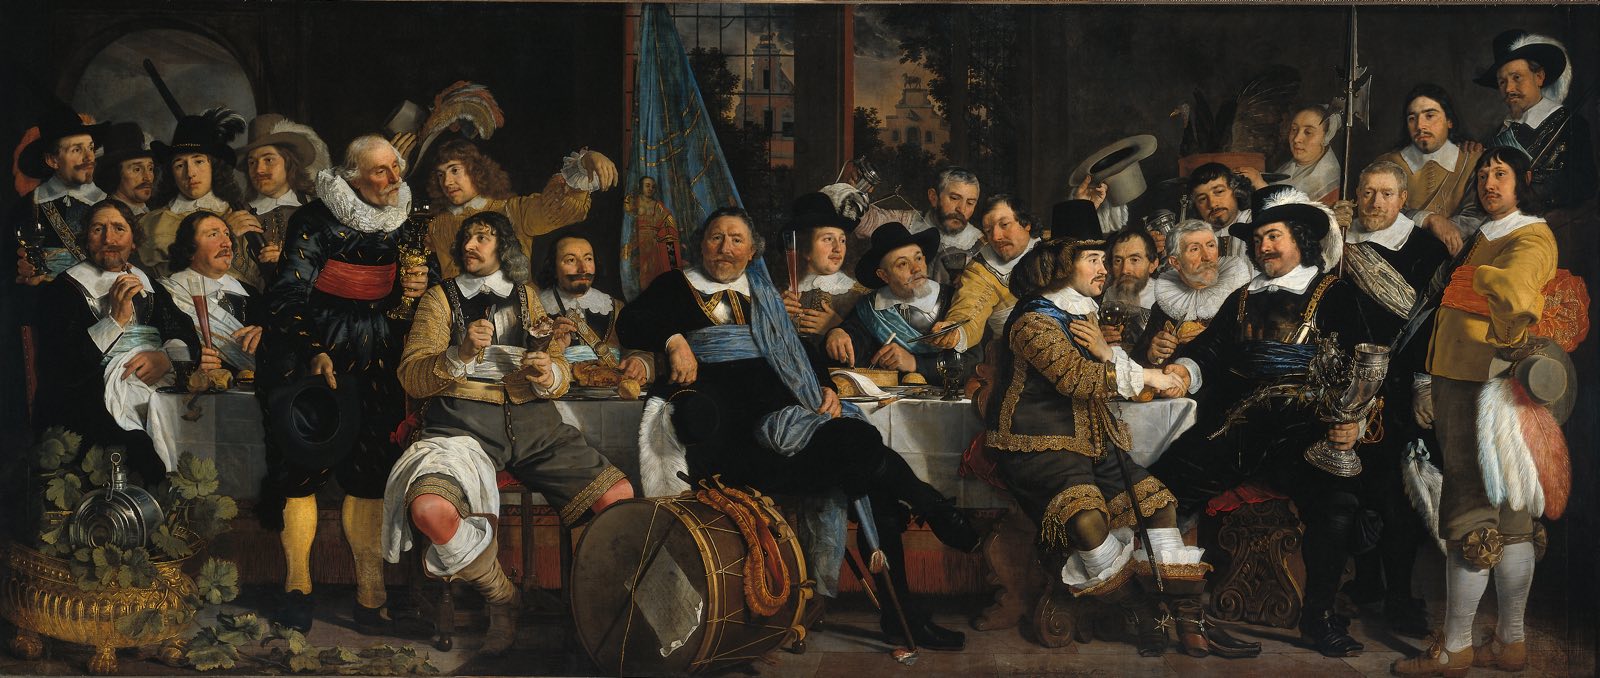 Bartholomeus_van_der_Helst,_Banquet_of_the_Amsterdam_Civic_Guard_in_Celebration_of_the_Peace_of_Münster